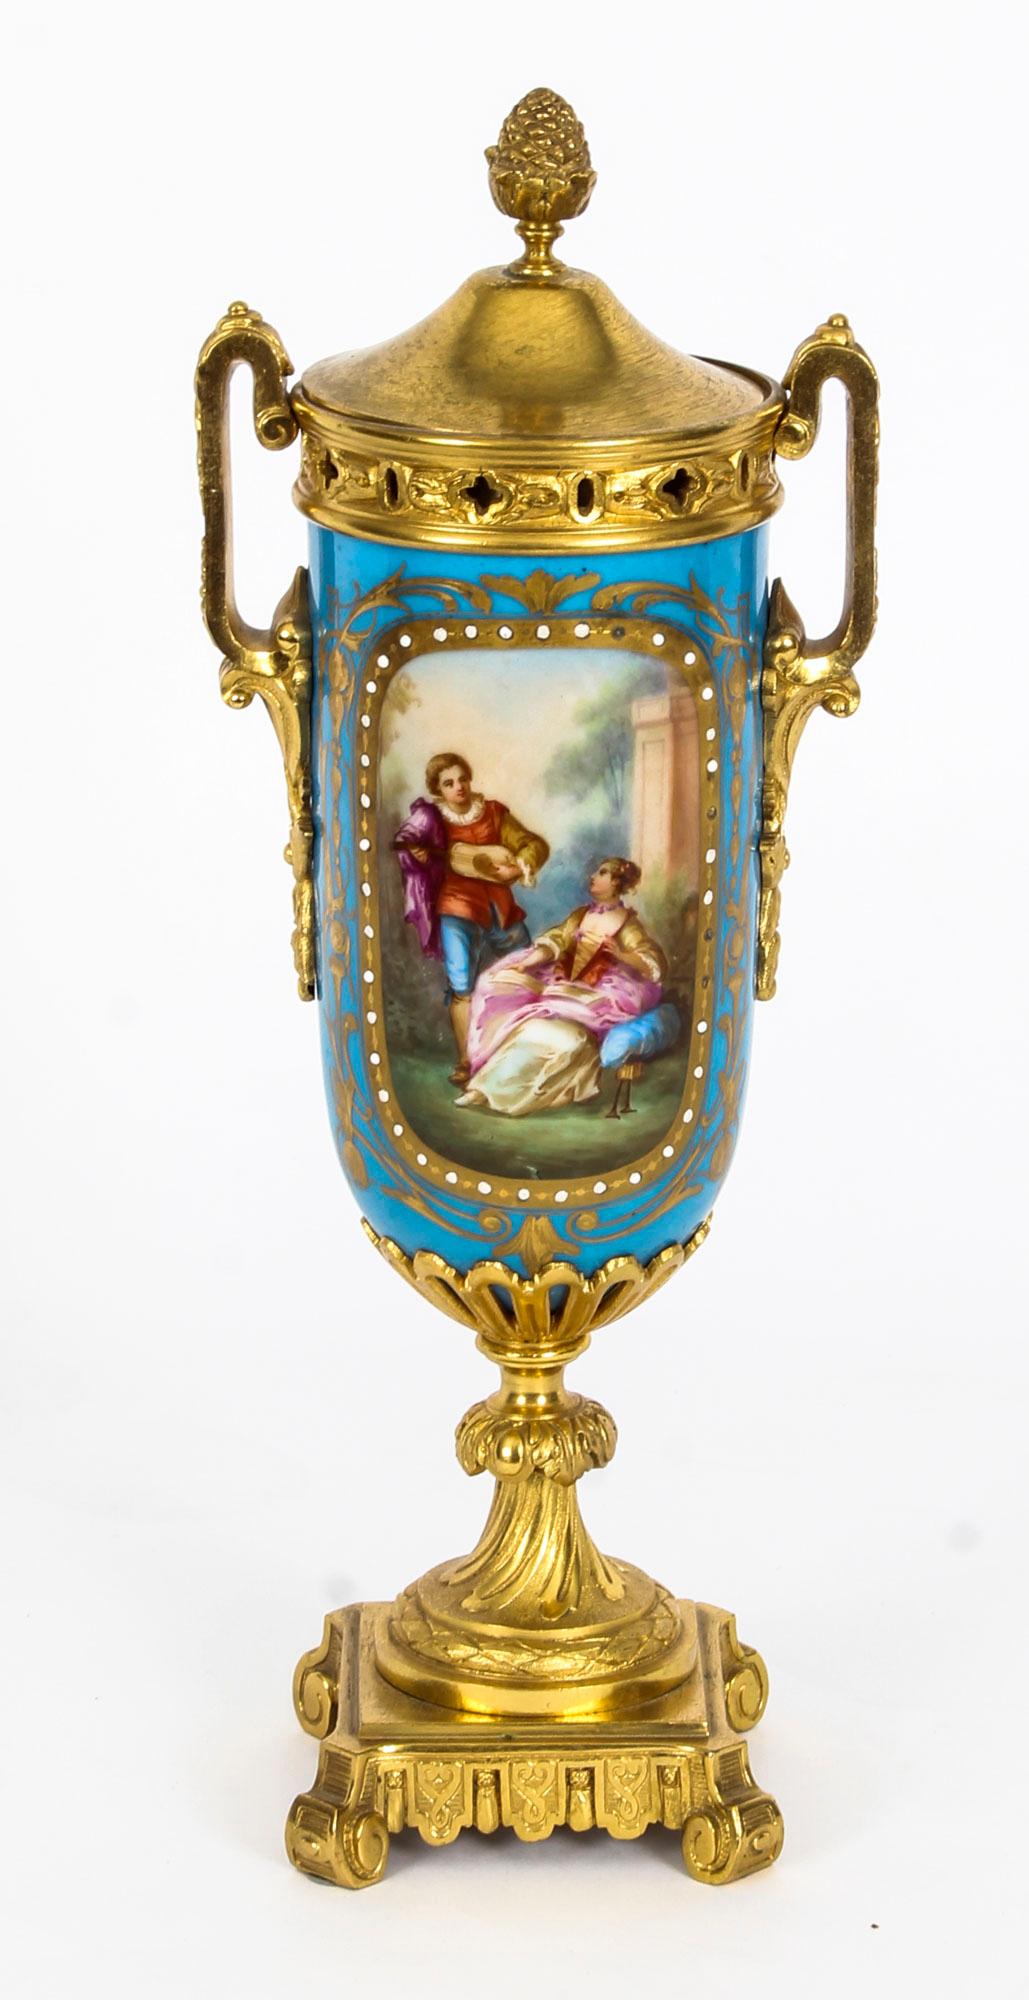 This is a beautiful antique pair of French Sevres porcelain and ormolu-mounted lidded vases, in the Louis XV manner, circa 1870 in date.

They are superbly decorated in a wonderful Bleu Celeste color with hand painted panels of courting couples